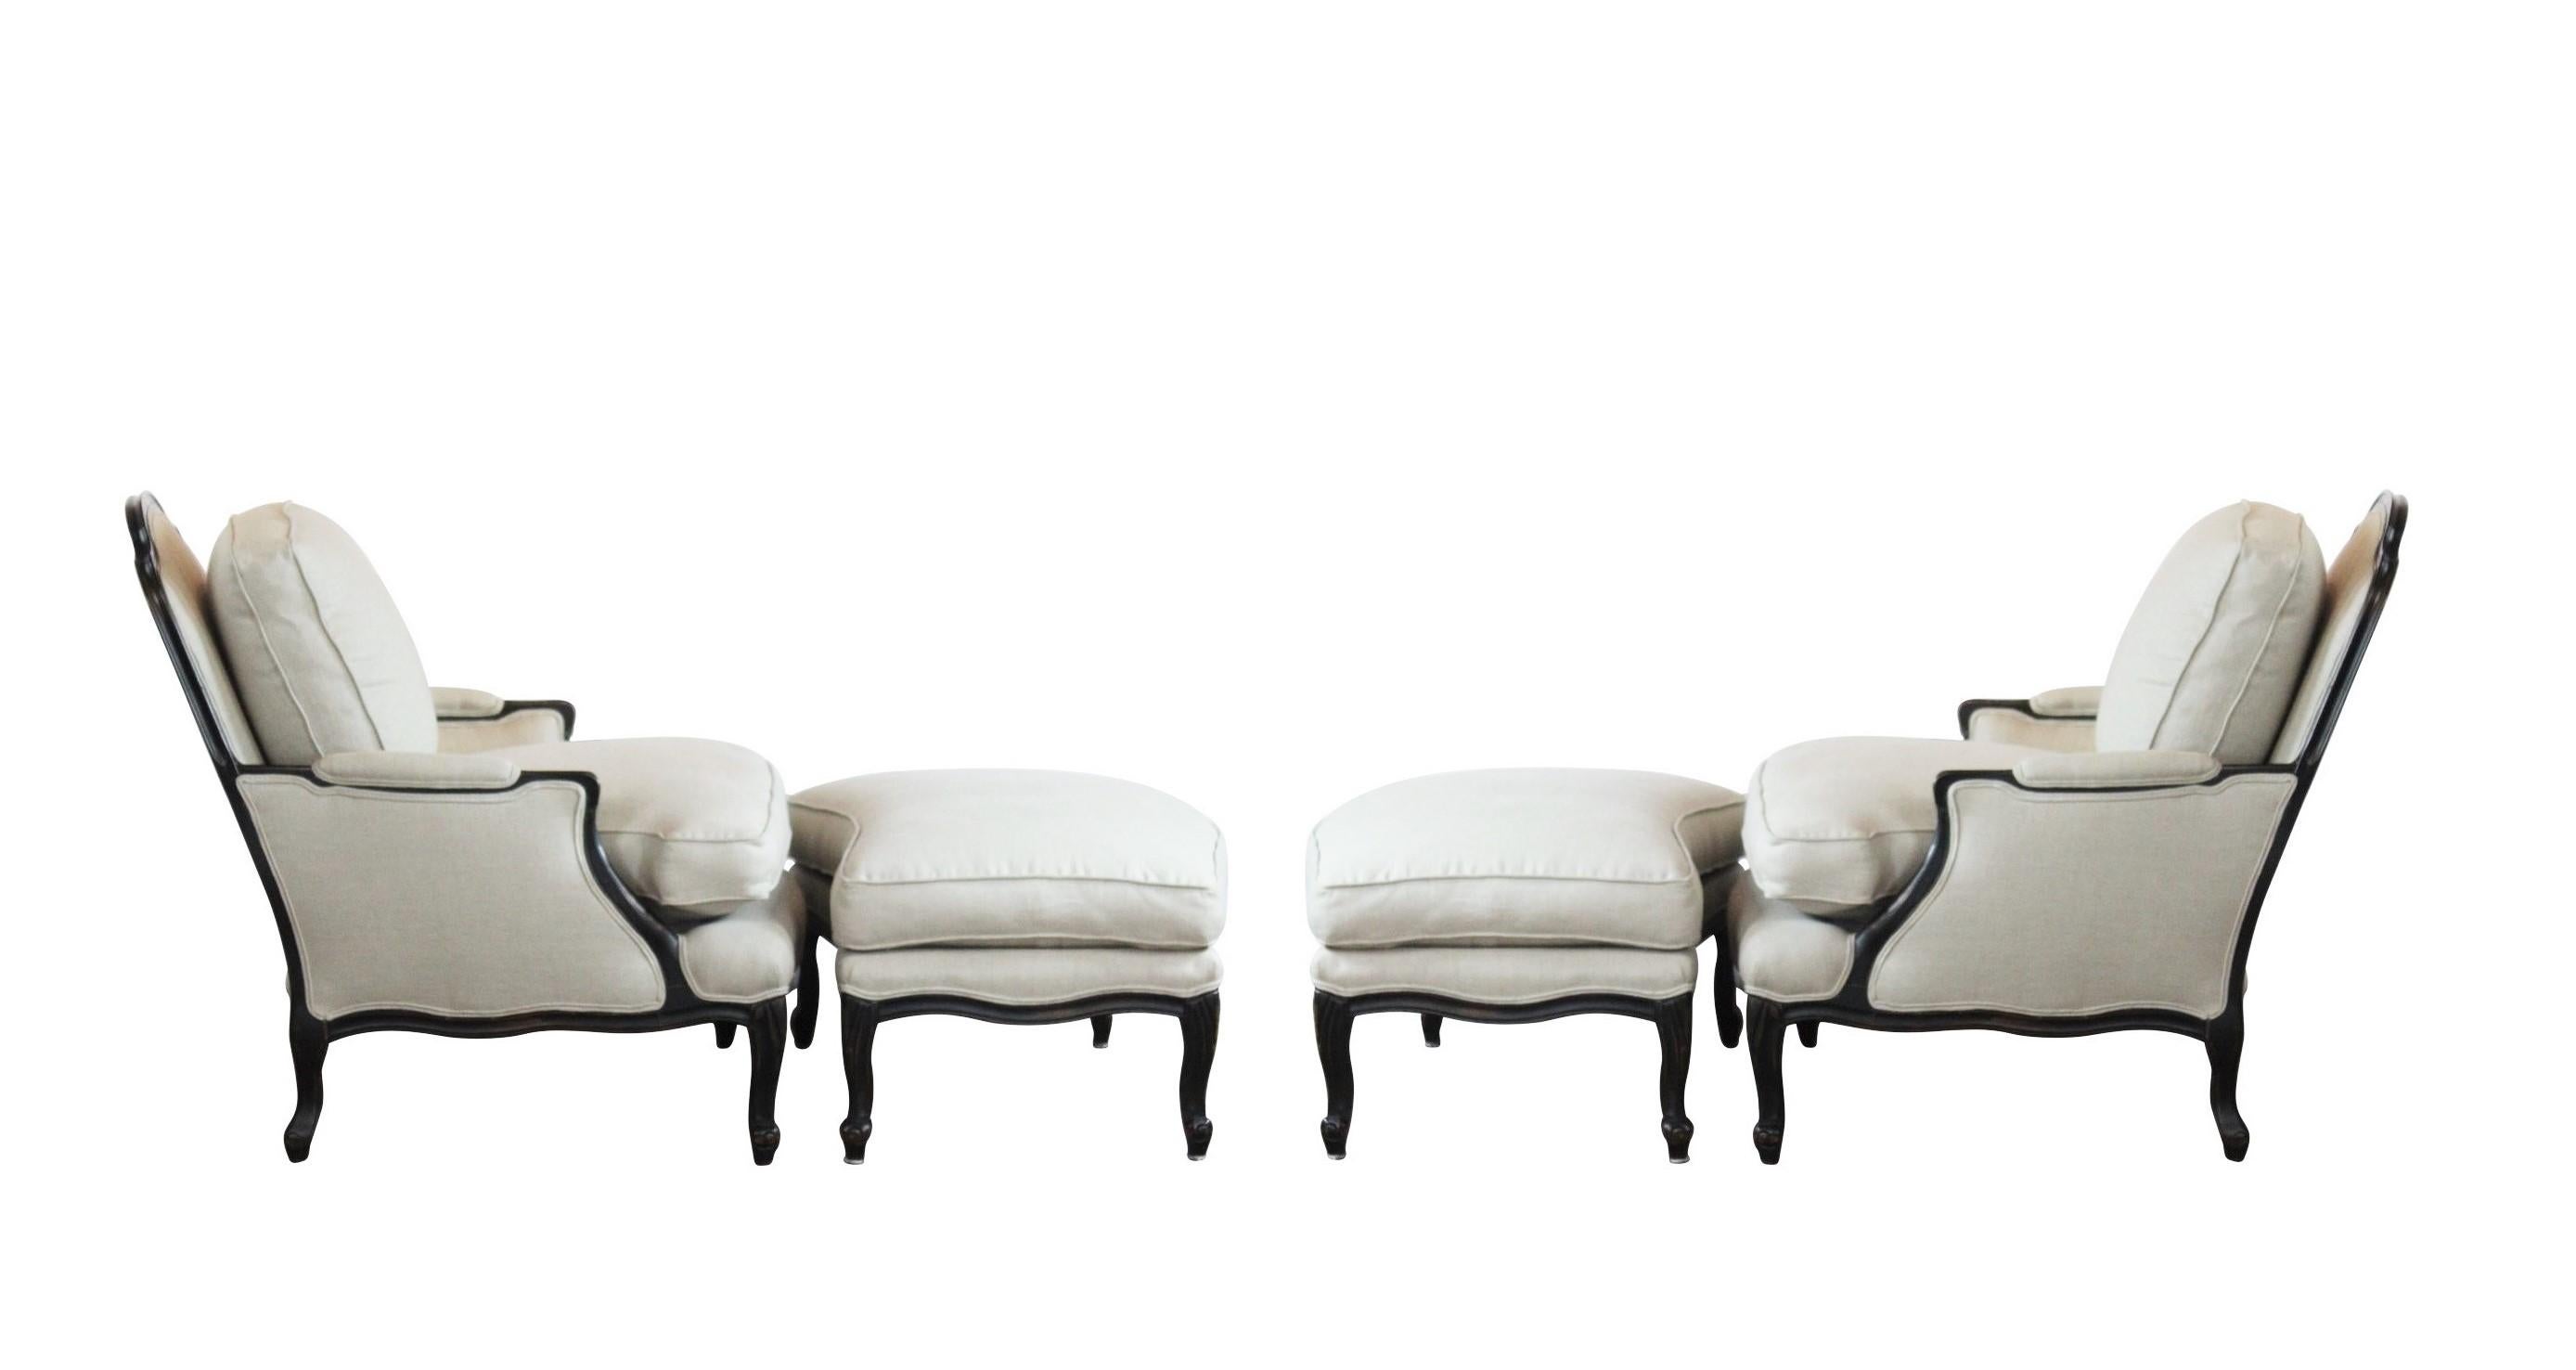 Pair of over-sized Louis XV style bergères and matching curved ottomans. The chairs features newly refinished frames in dark stain in a squared back with an arched crest rail and rounded ears. It has straight, fluted arms and a cushioned seat with a